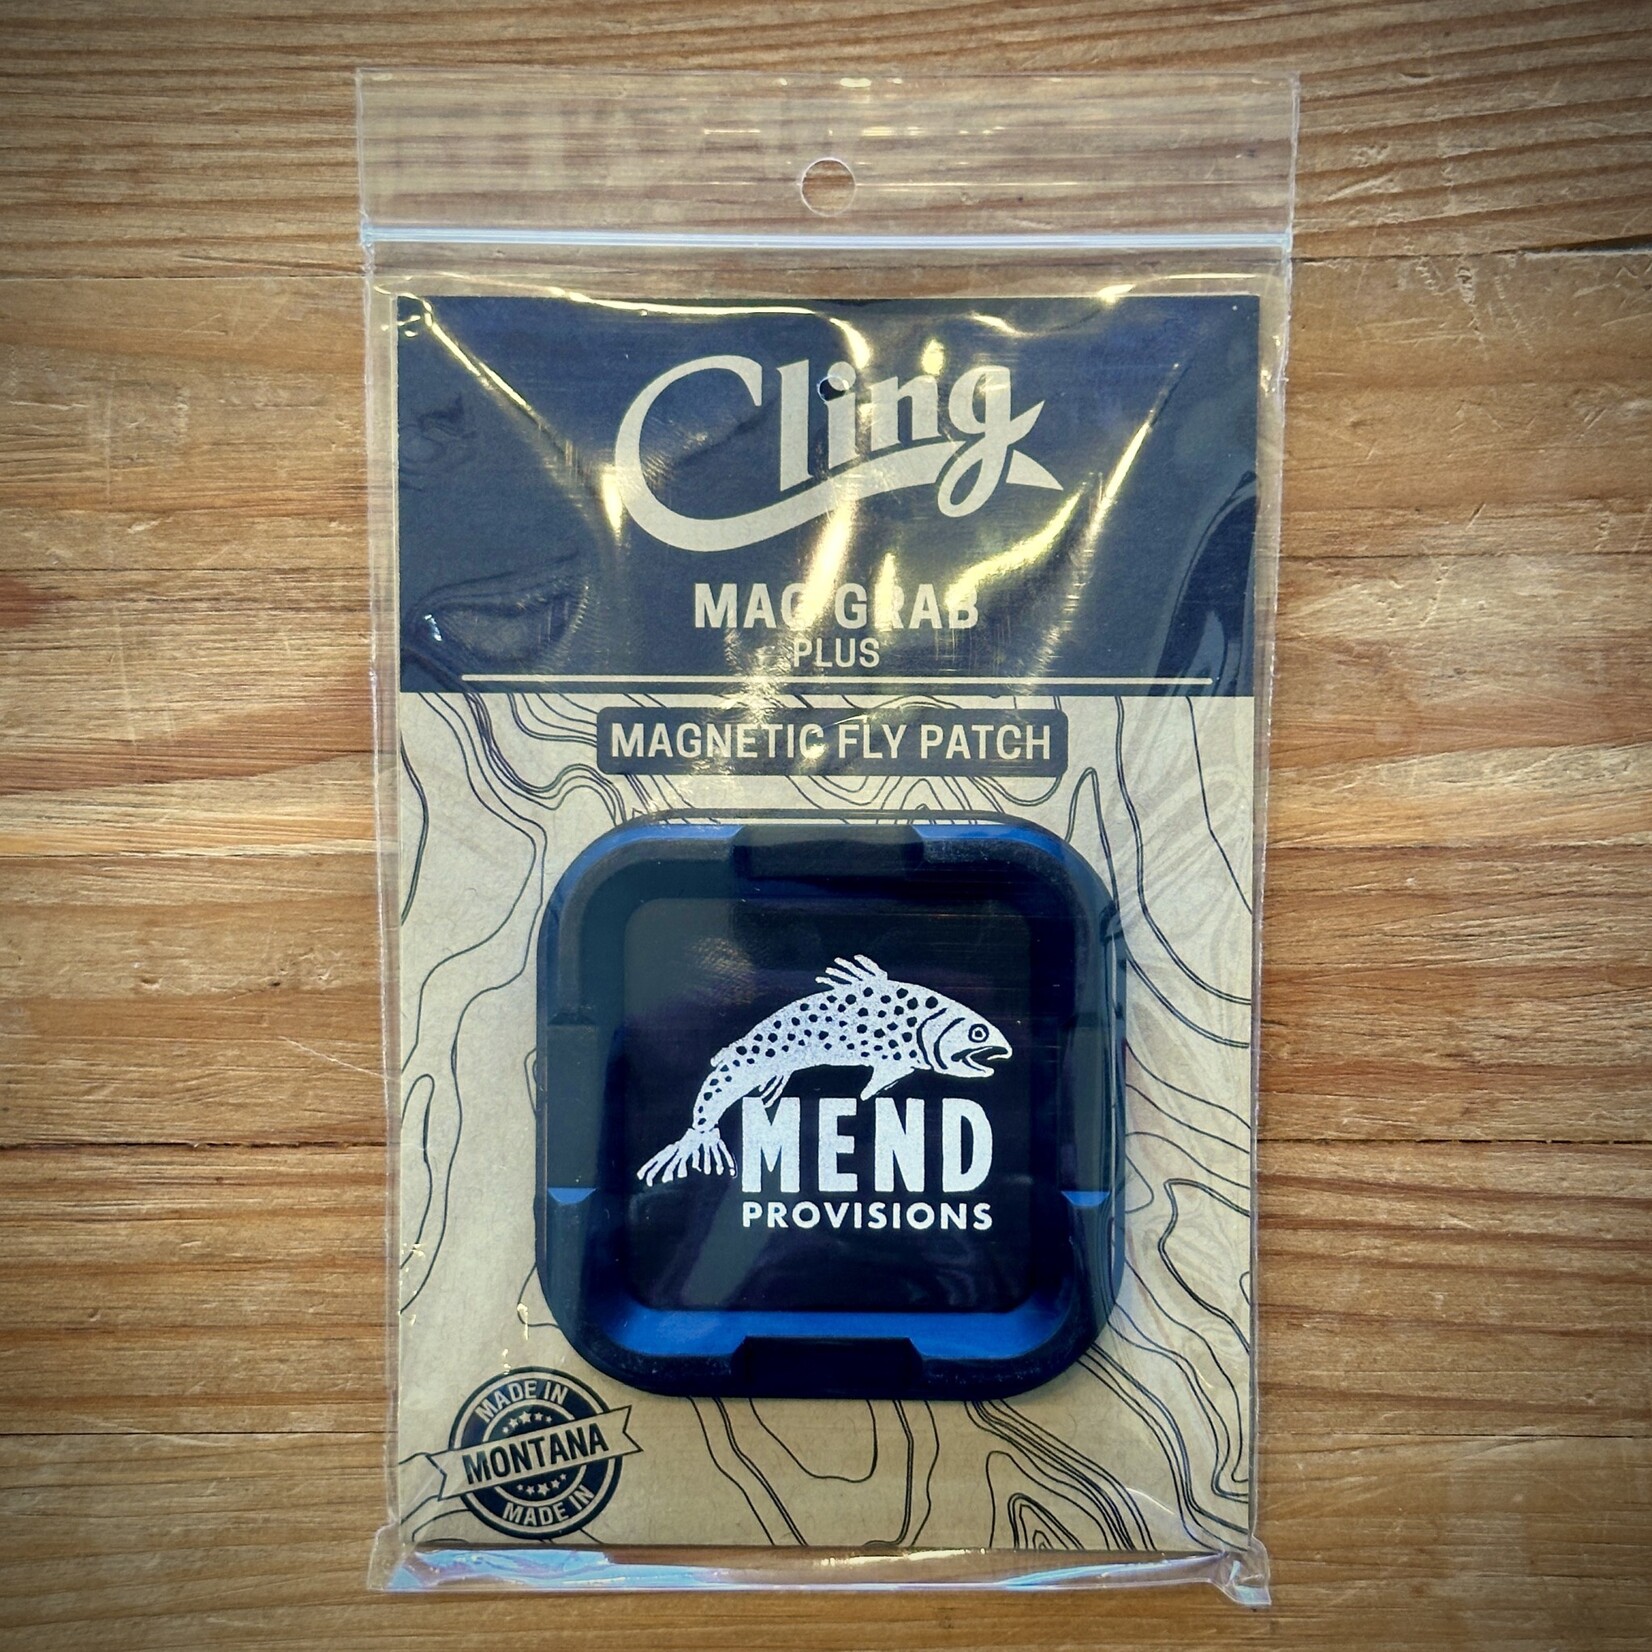 Cling MEND x CLING MAGNETIC FLY PATCH - MAG GRAB PLUS